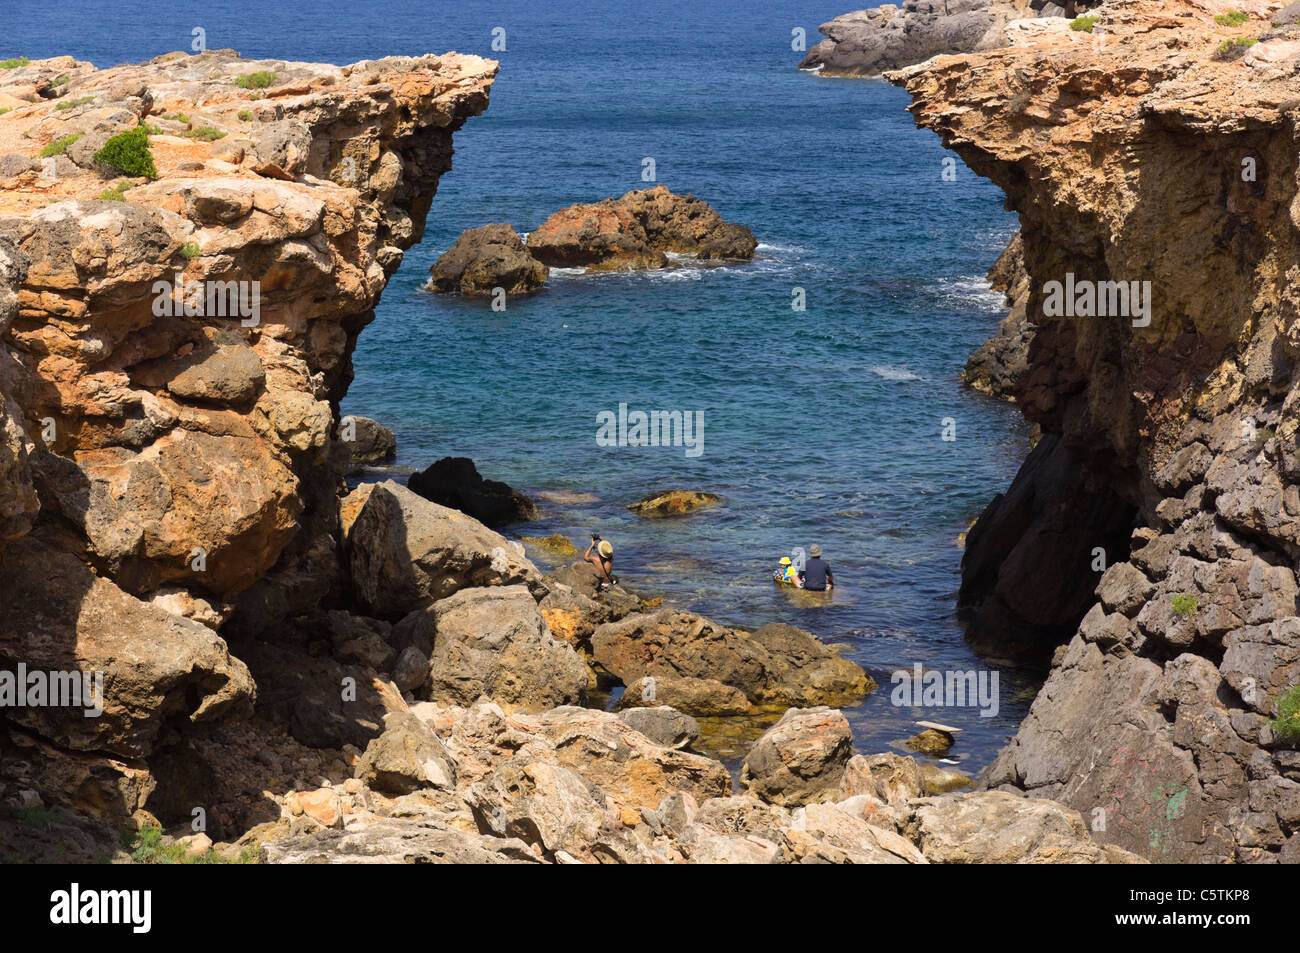 Ibiza, Balearics, Spain - the rocky inlet and bay of Es Pou des Lleo. Young family swimming in the 'Lion's Mouth'. Stock Photo